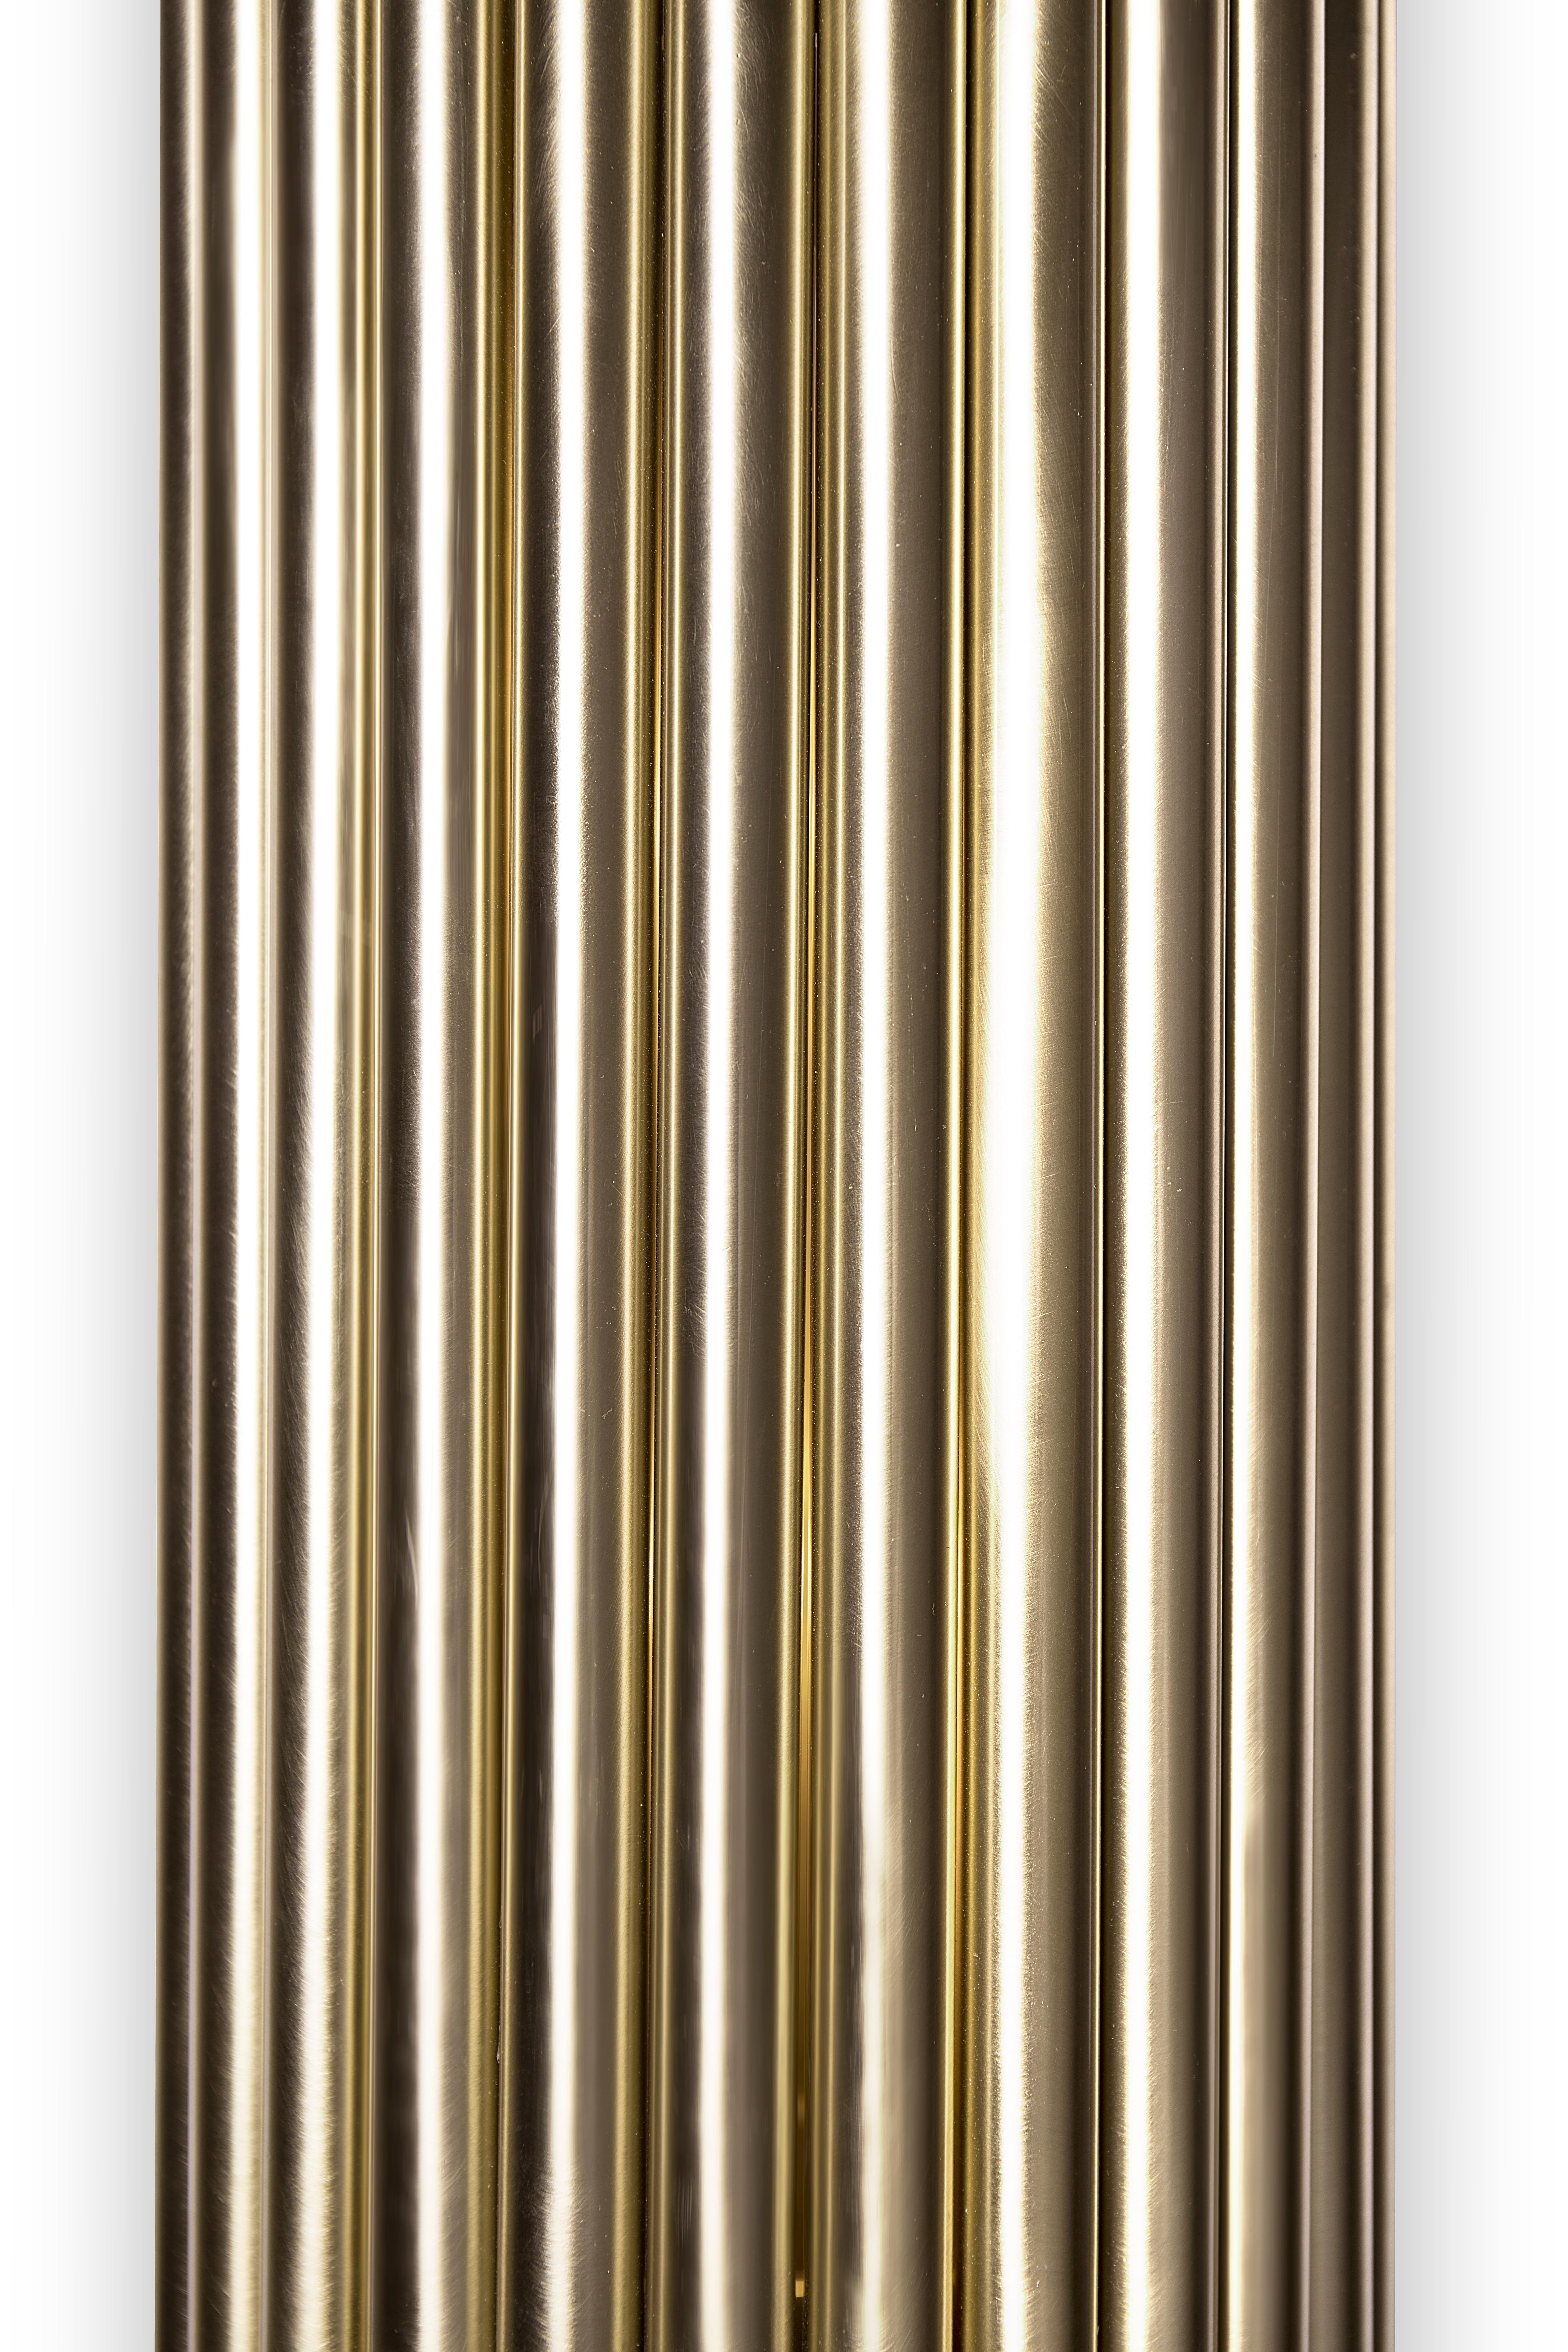 Hand-Crafted Matheny Large Wall Light in Brass with Brushed Nickel Finish For Sale